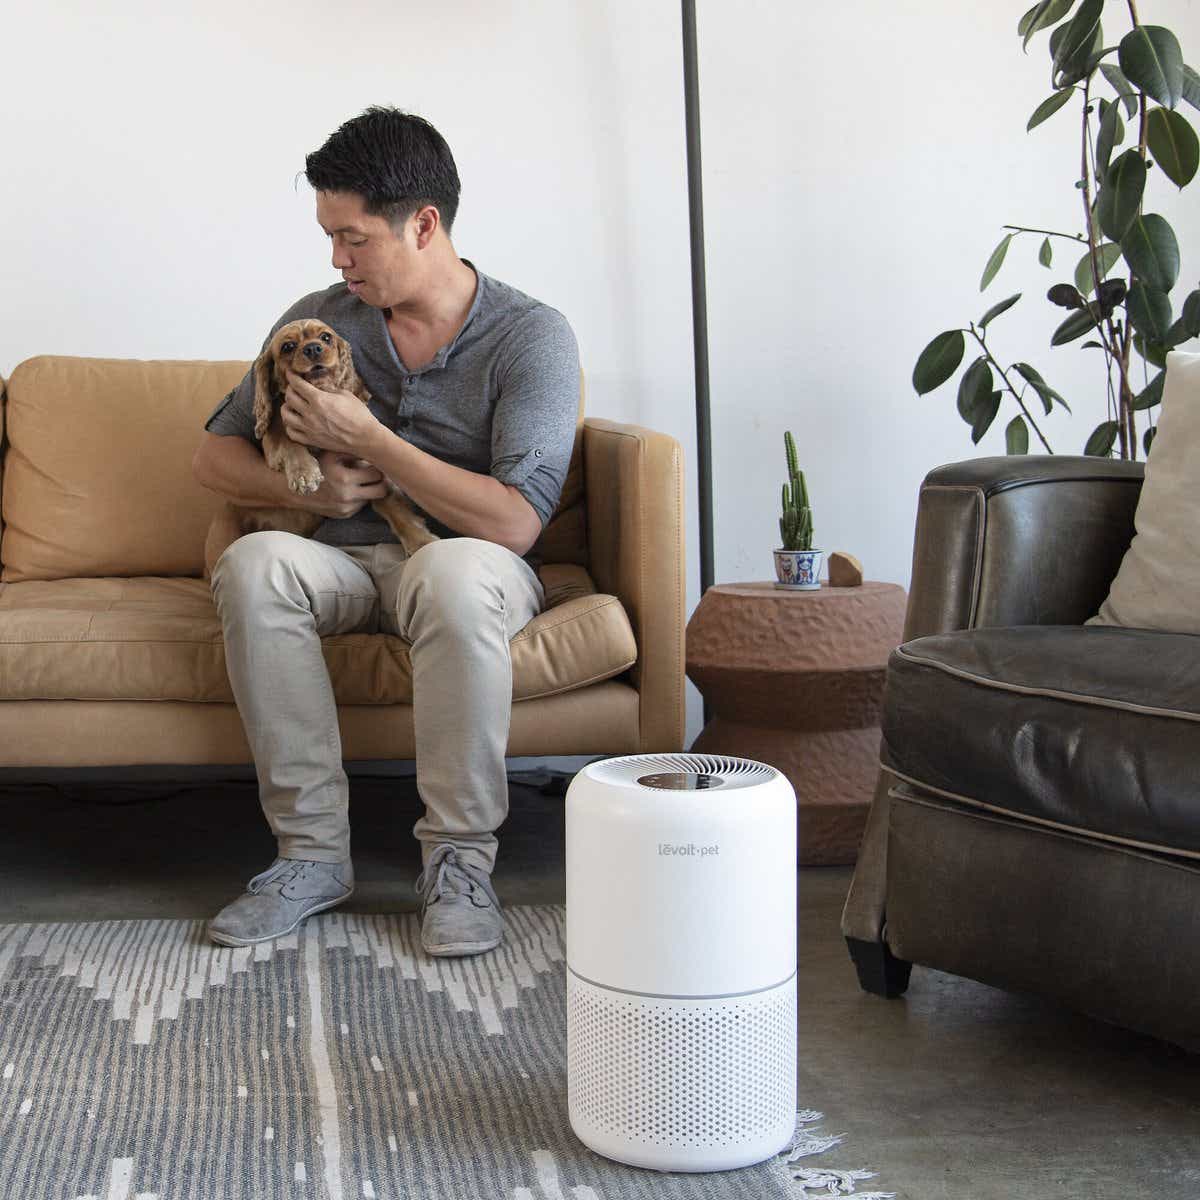 A man cradles a small dog in the background while a white, electric air purifier stands in the foreground.